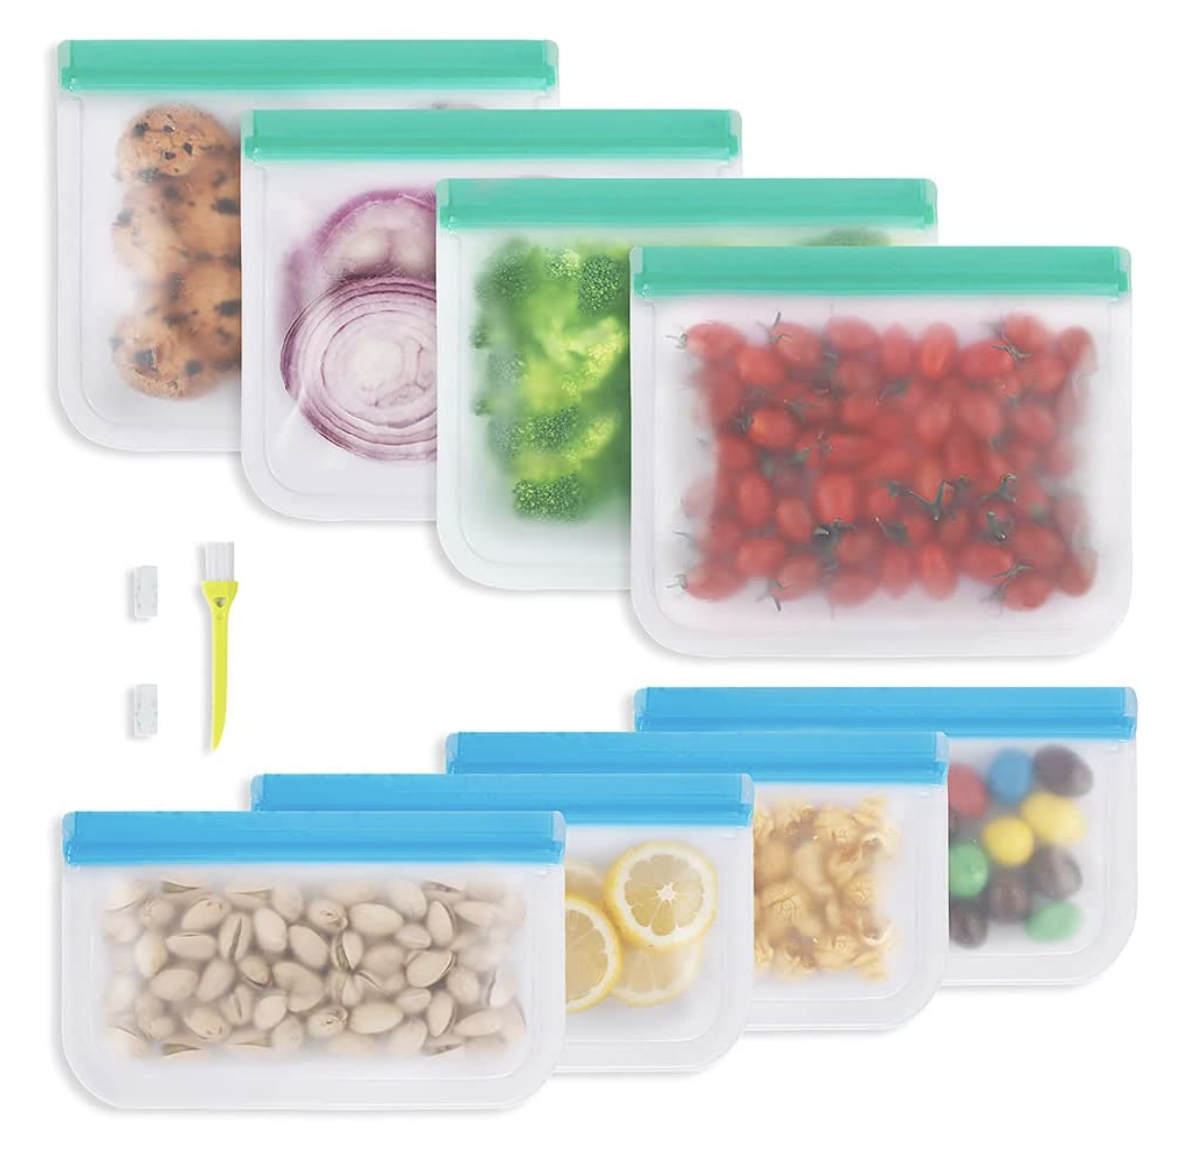 Set of 8 reusable sandwich and snack bags with different foods in each